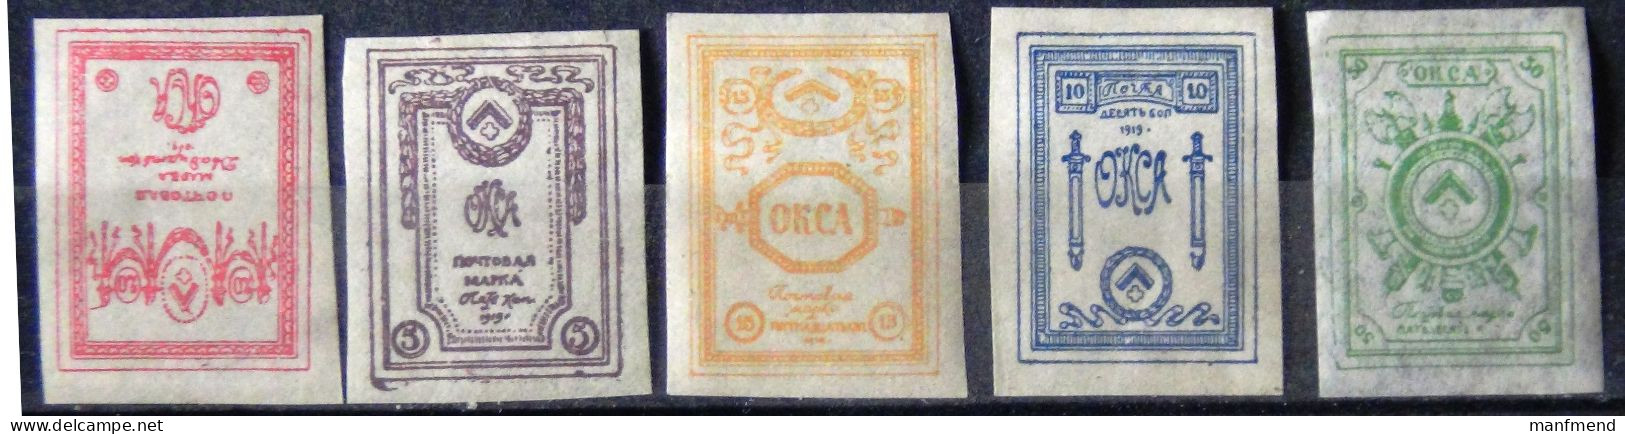 Russia - Civil War Army Of The North OKSA Corp - 1919 -  Yt: 1-5*MNH - Look Scan - 1919-20 Ocucpación Británica